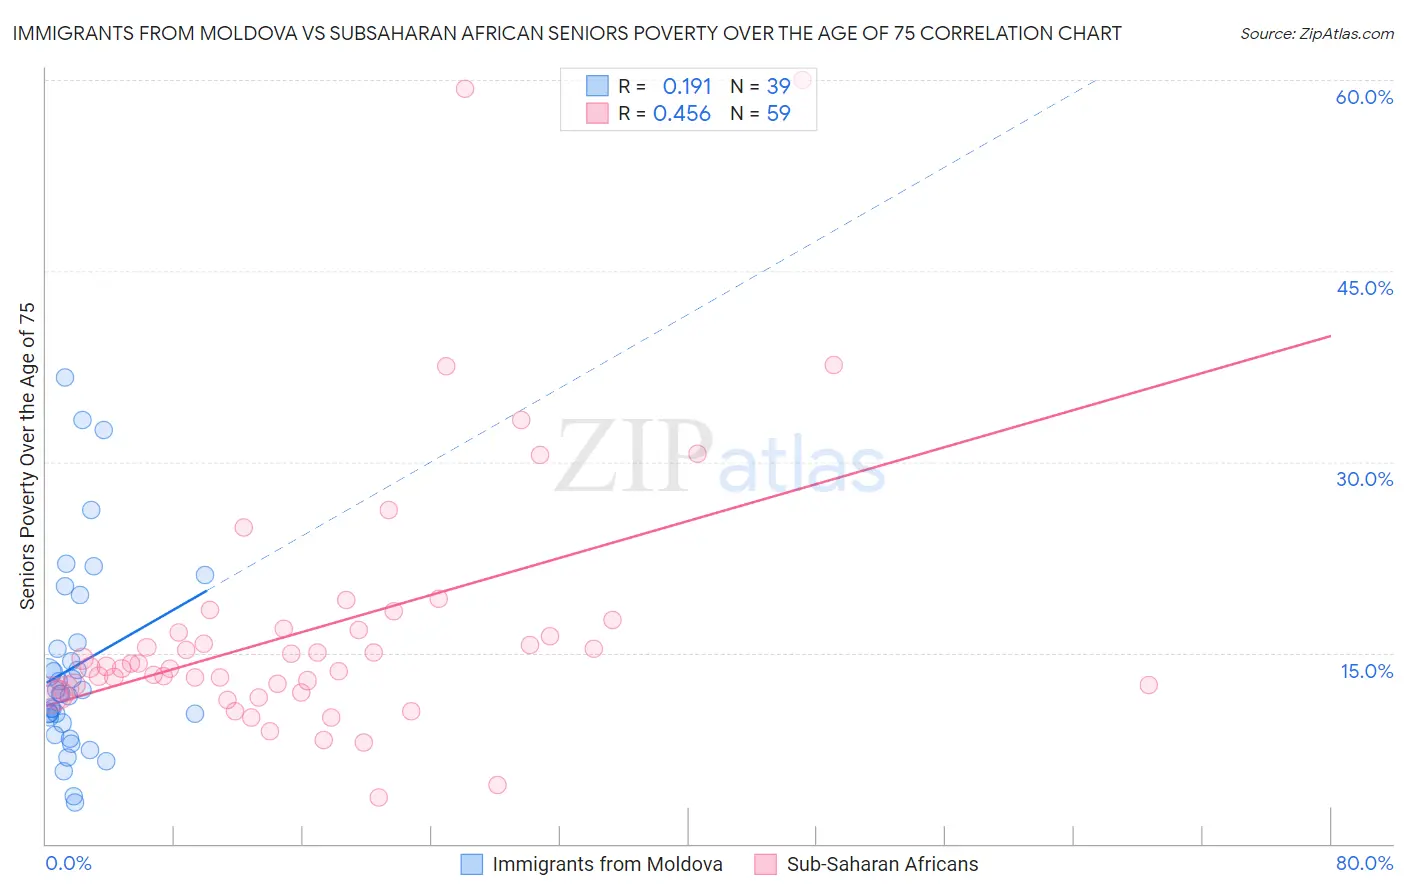 Immigrants from Moldova vs Subsaharan African Seniors Poverty Over the Age of 75